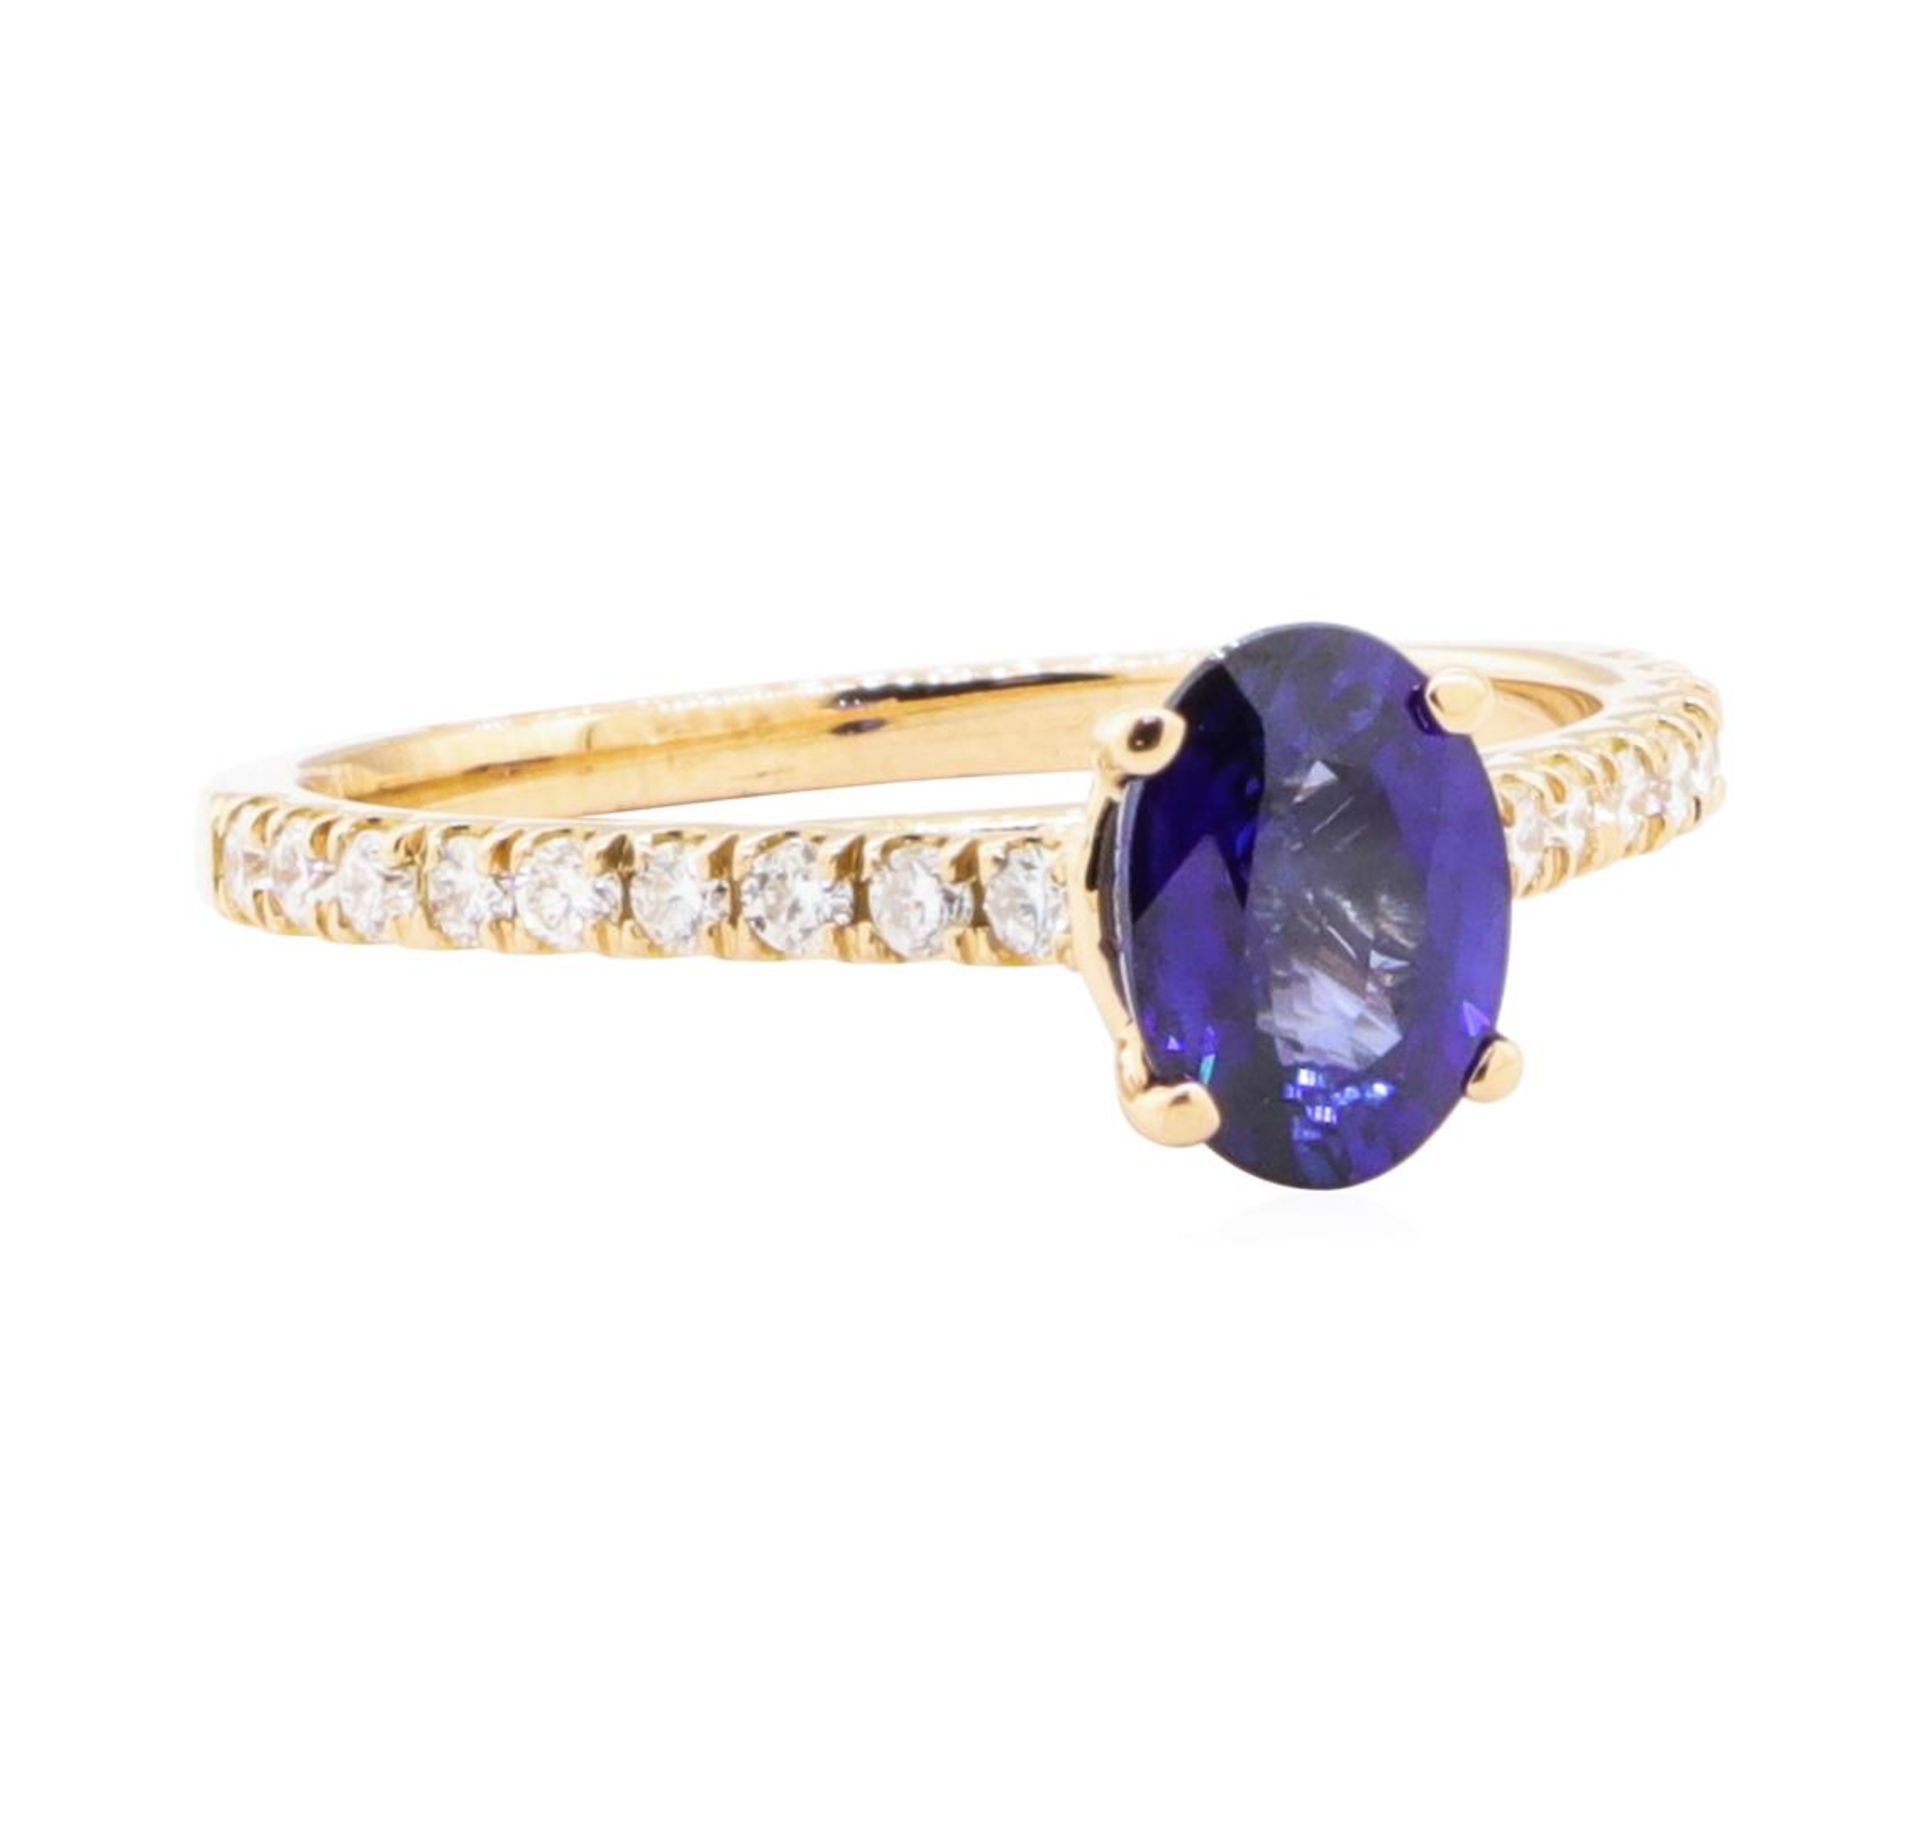 1.24ctw Sapphire and Diamond Ring - 14KT Rose Gold